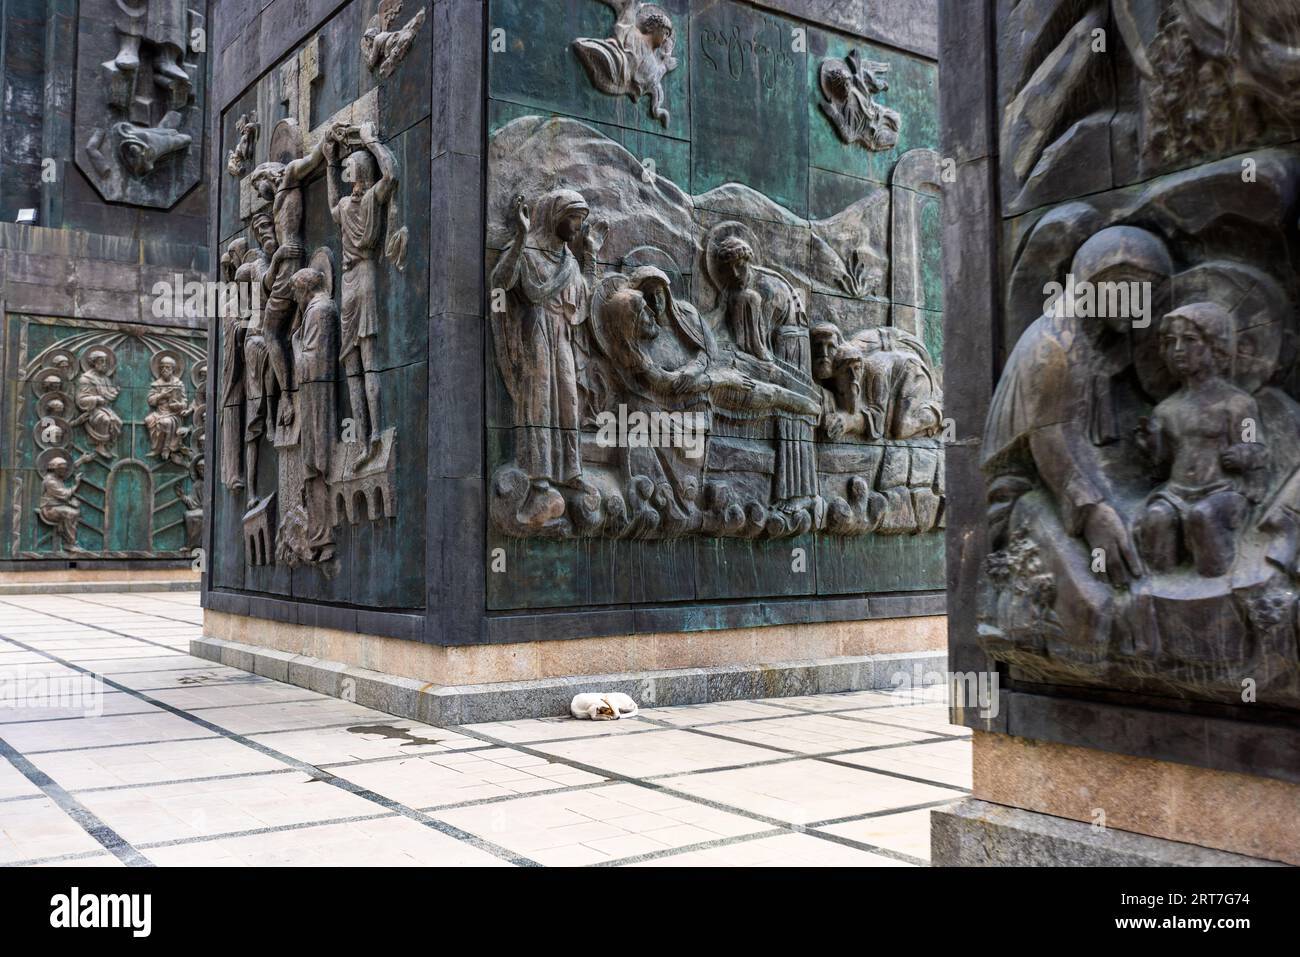 A dog dozes in the Chronicle of Georgia, a monumental sculpture near Tbilisi, the capital of Georgia. 16 columns rise 35 meters high. Biblical scenes are depicted in the lower part. Above them are depicted personalities significant for the history of Georgia. The monument was begun in 1985 by the sculptor Zurab Zereteli and has not yet been completed. Stock Photo